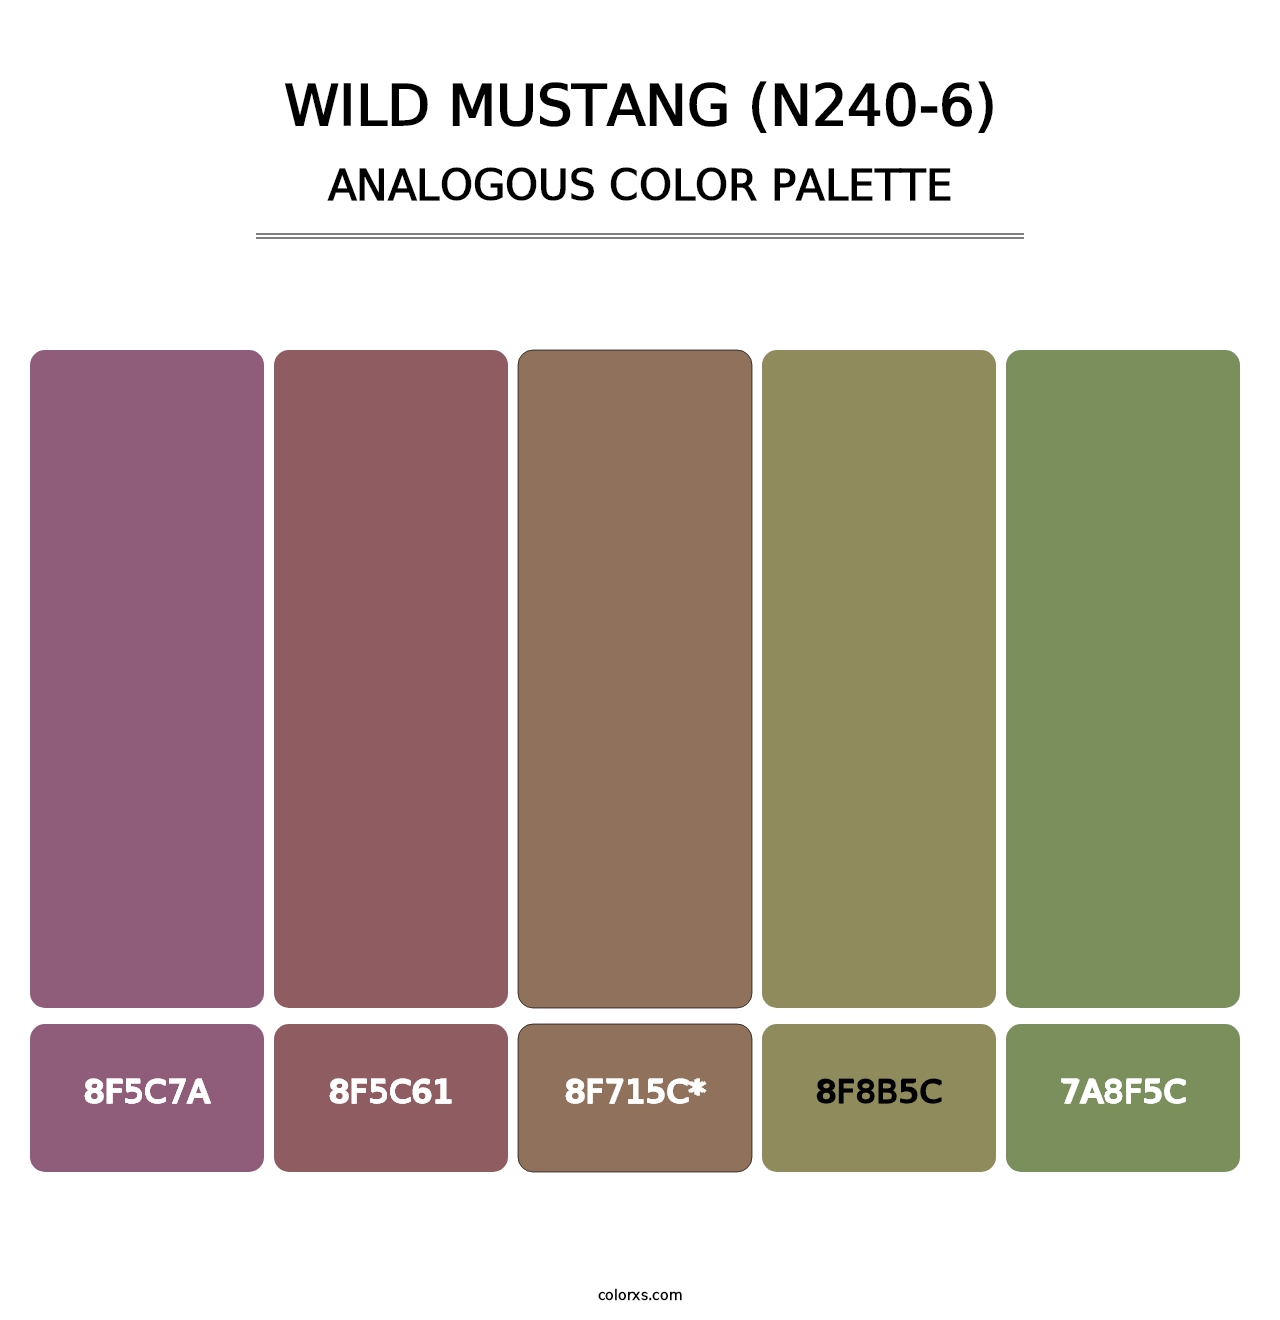 Wild Mustang (N240-6) - Analogous Color Palette